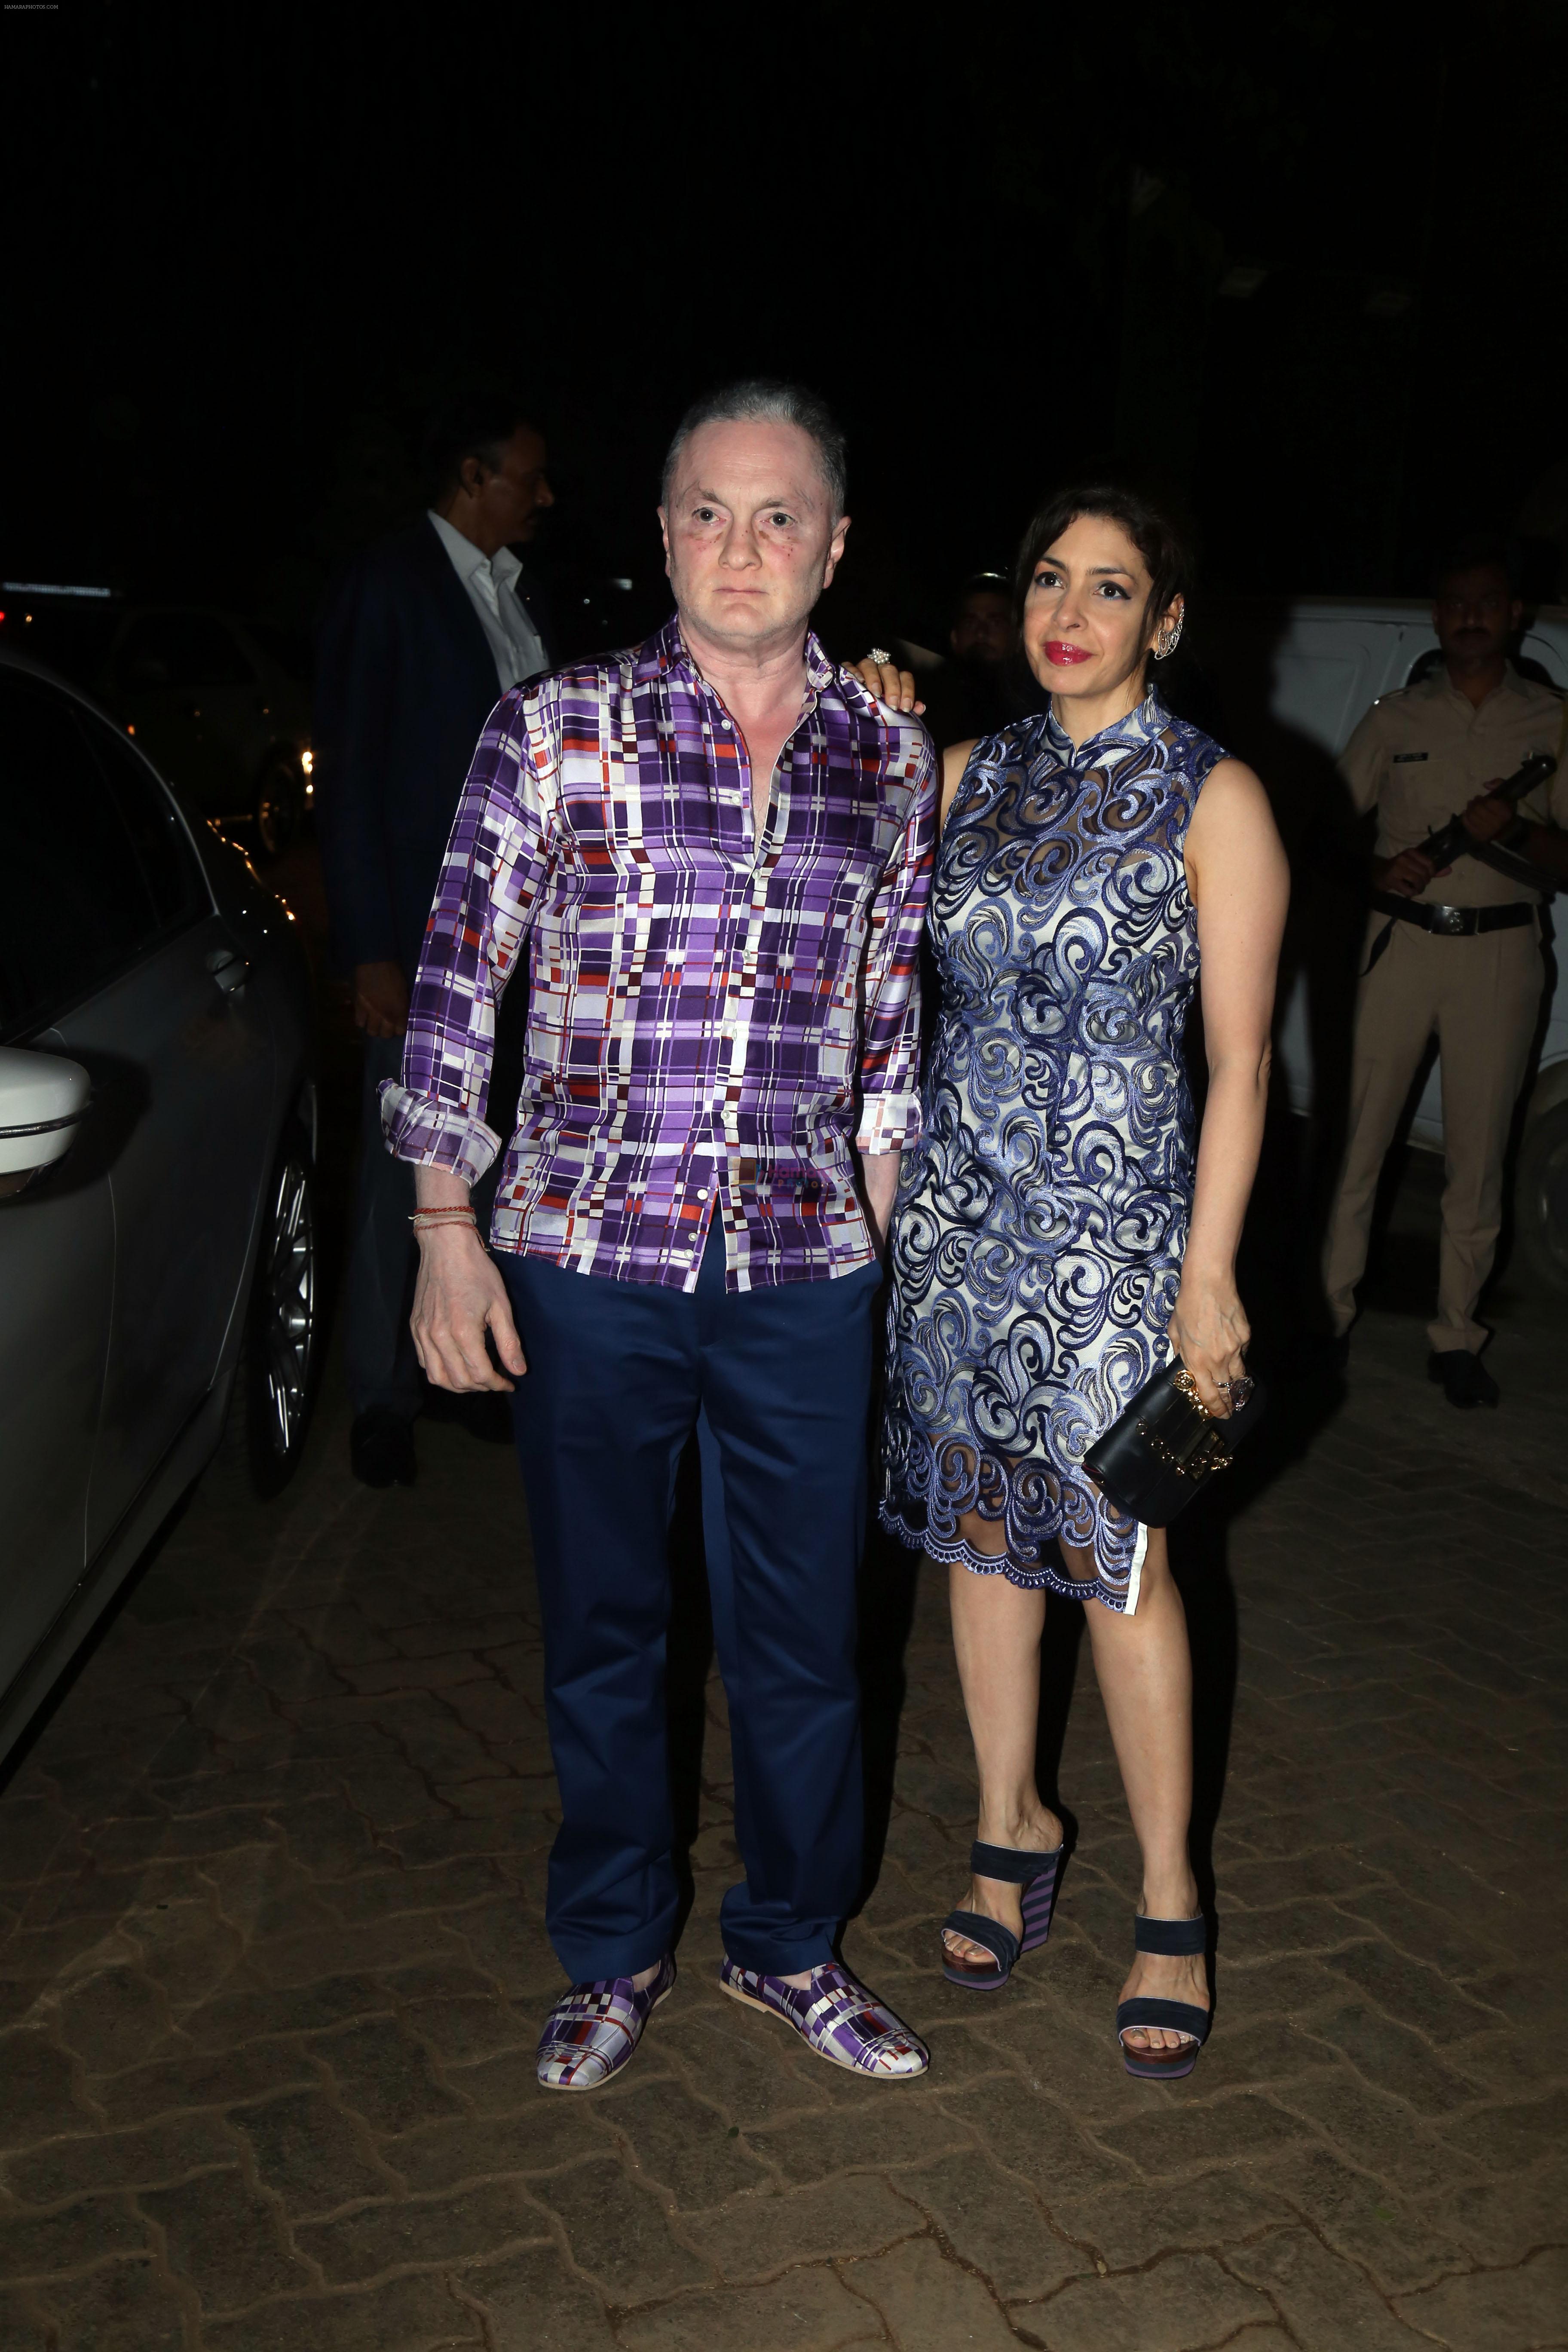 Gautam Singhania with wife Nawaz Modi Singhania at the ReOpening of Keibaa X All Saints and Celebration of Society Achievers and Society Interiors and Design Magazine